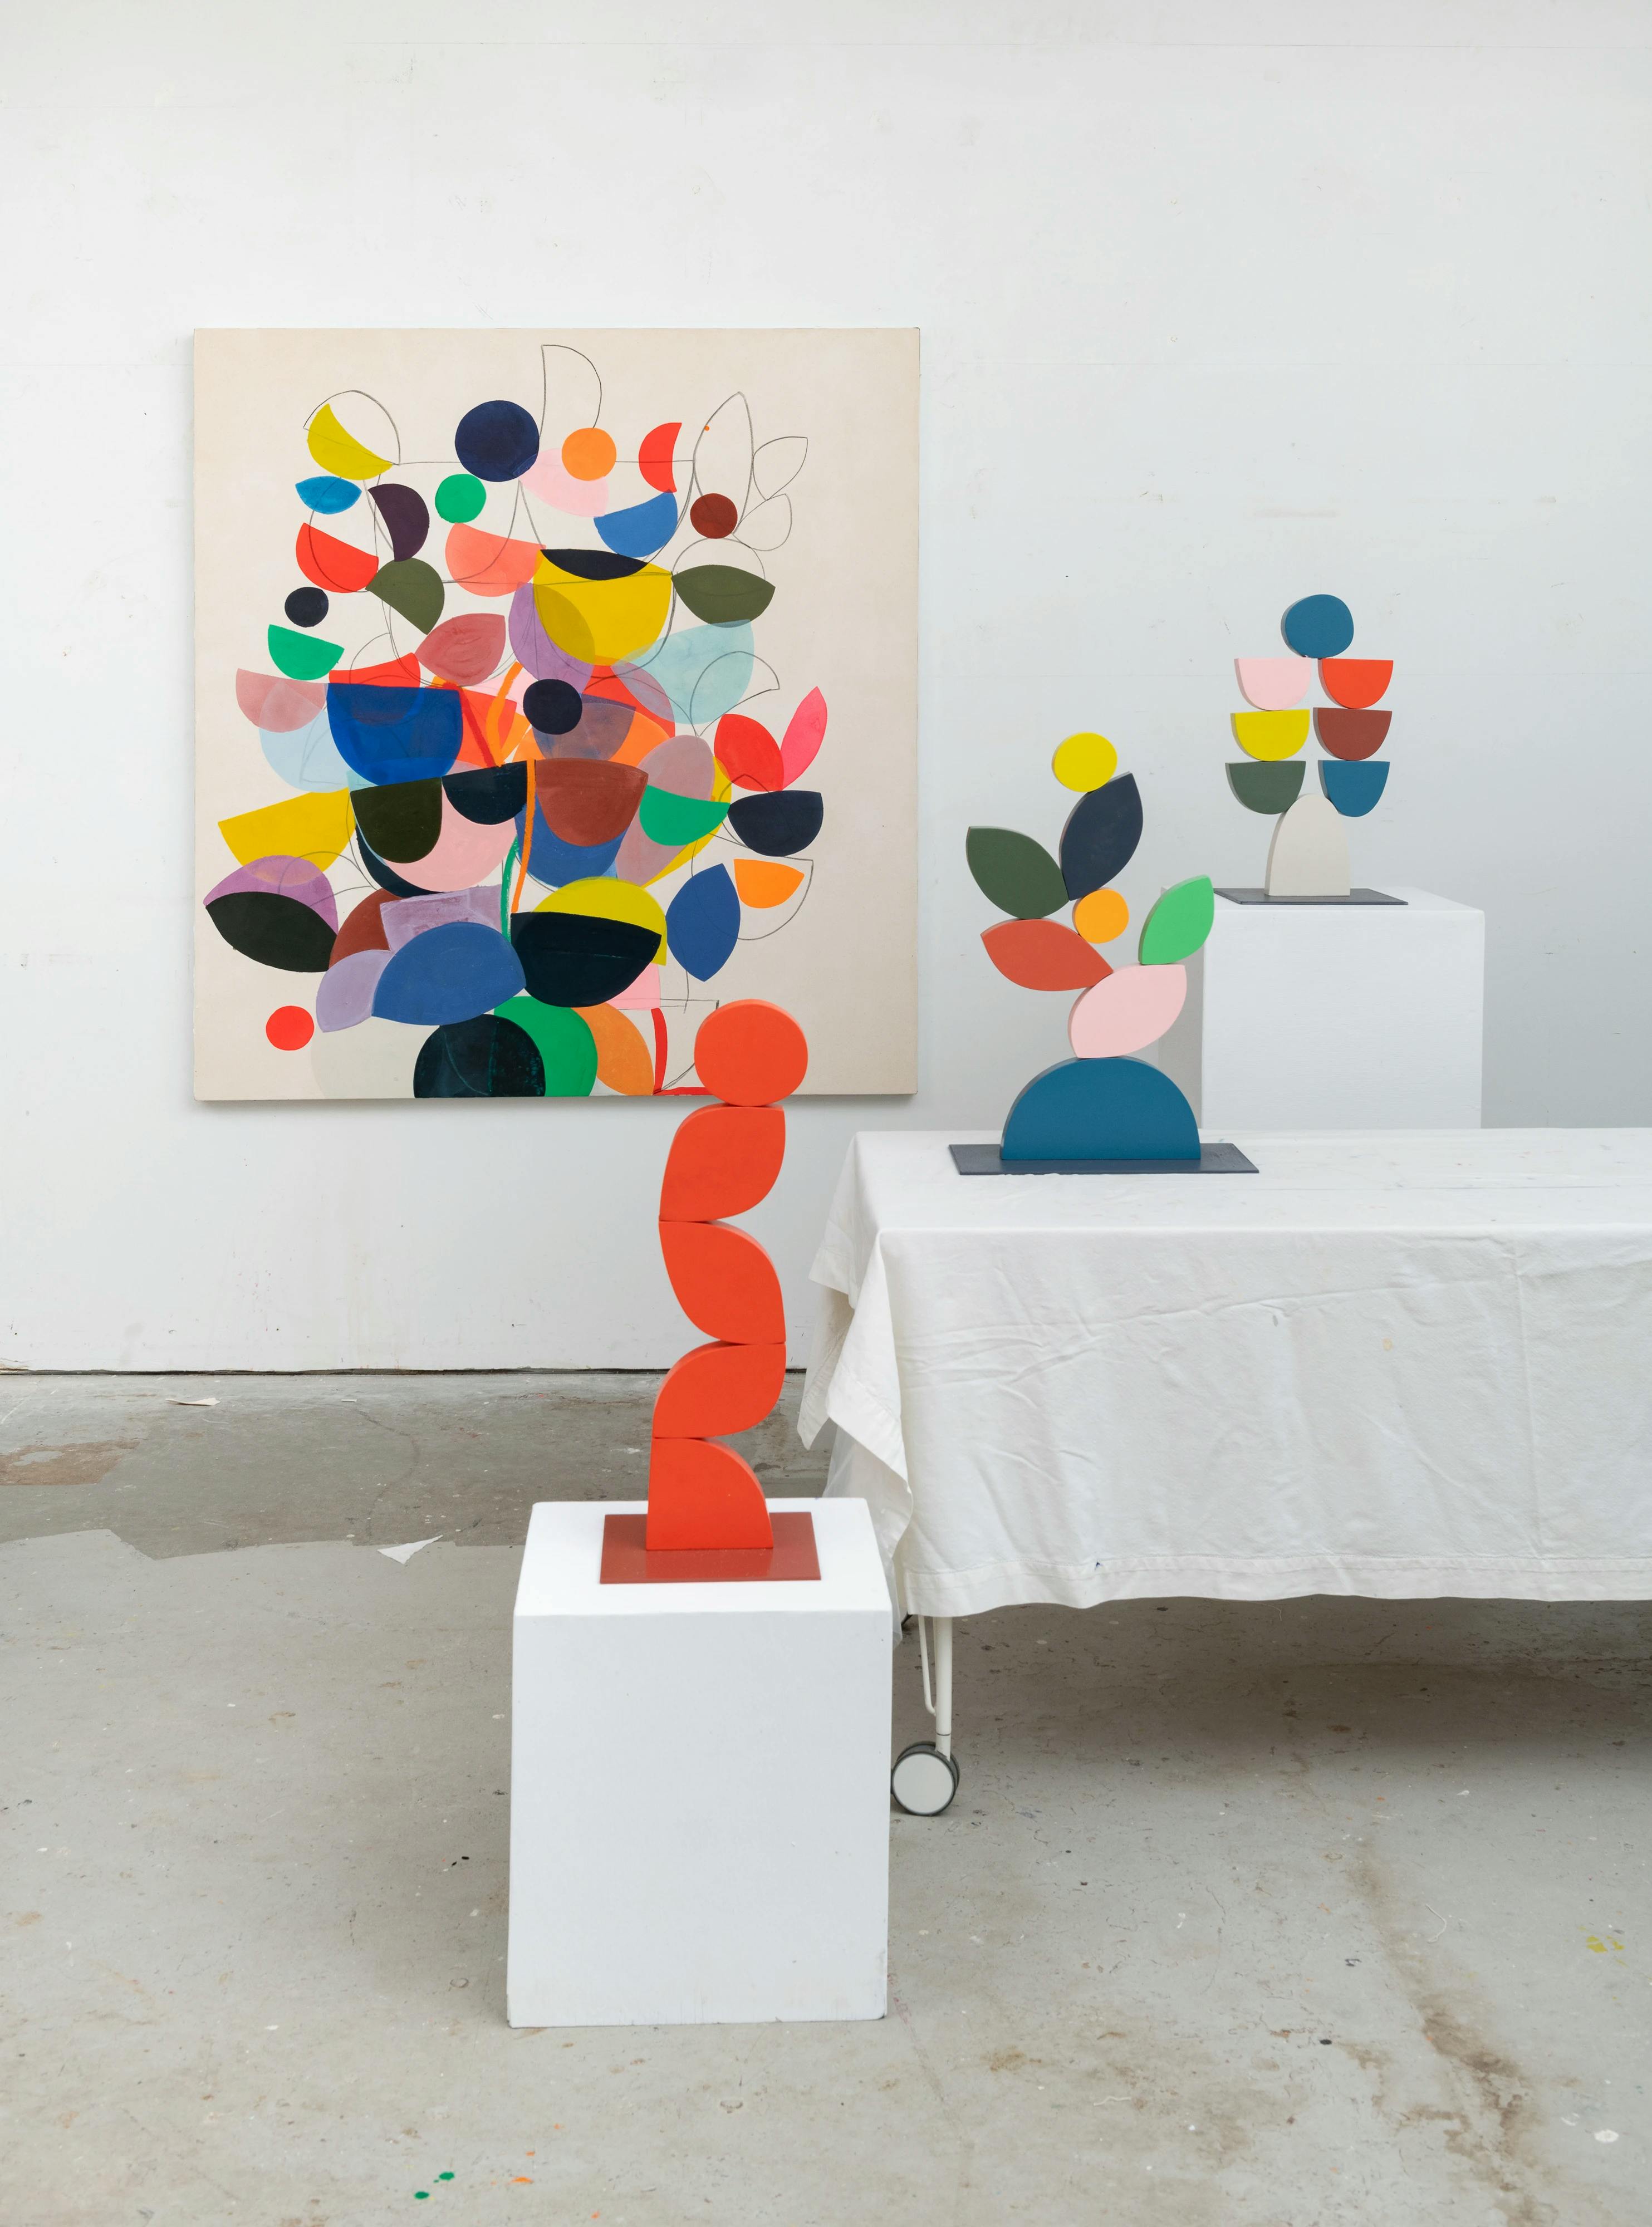 Three tabletop sculpture and one large colorful painting by artist Vicki Sher on display in her studio.